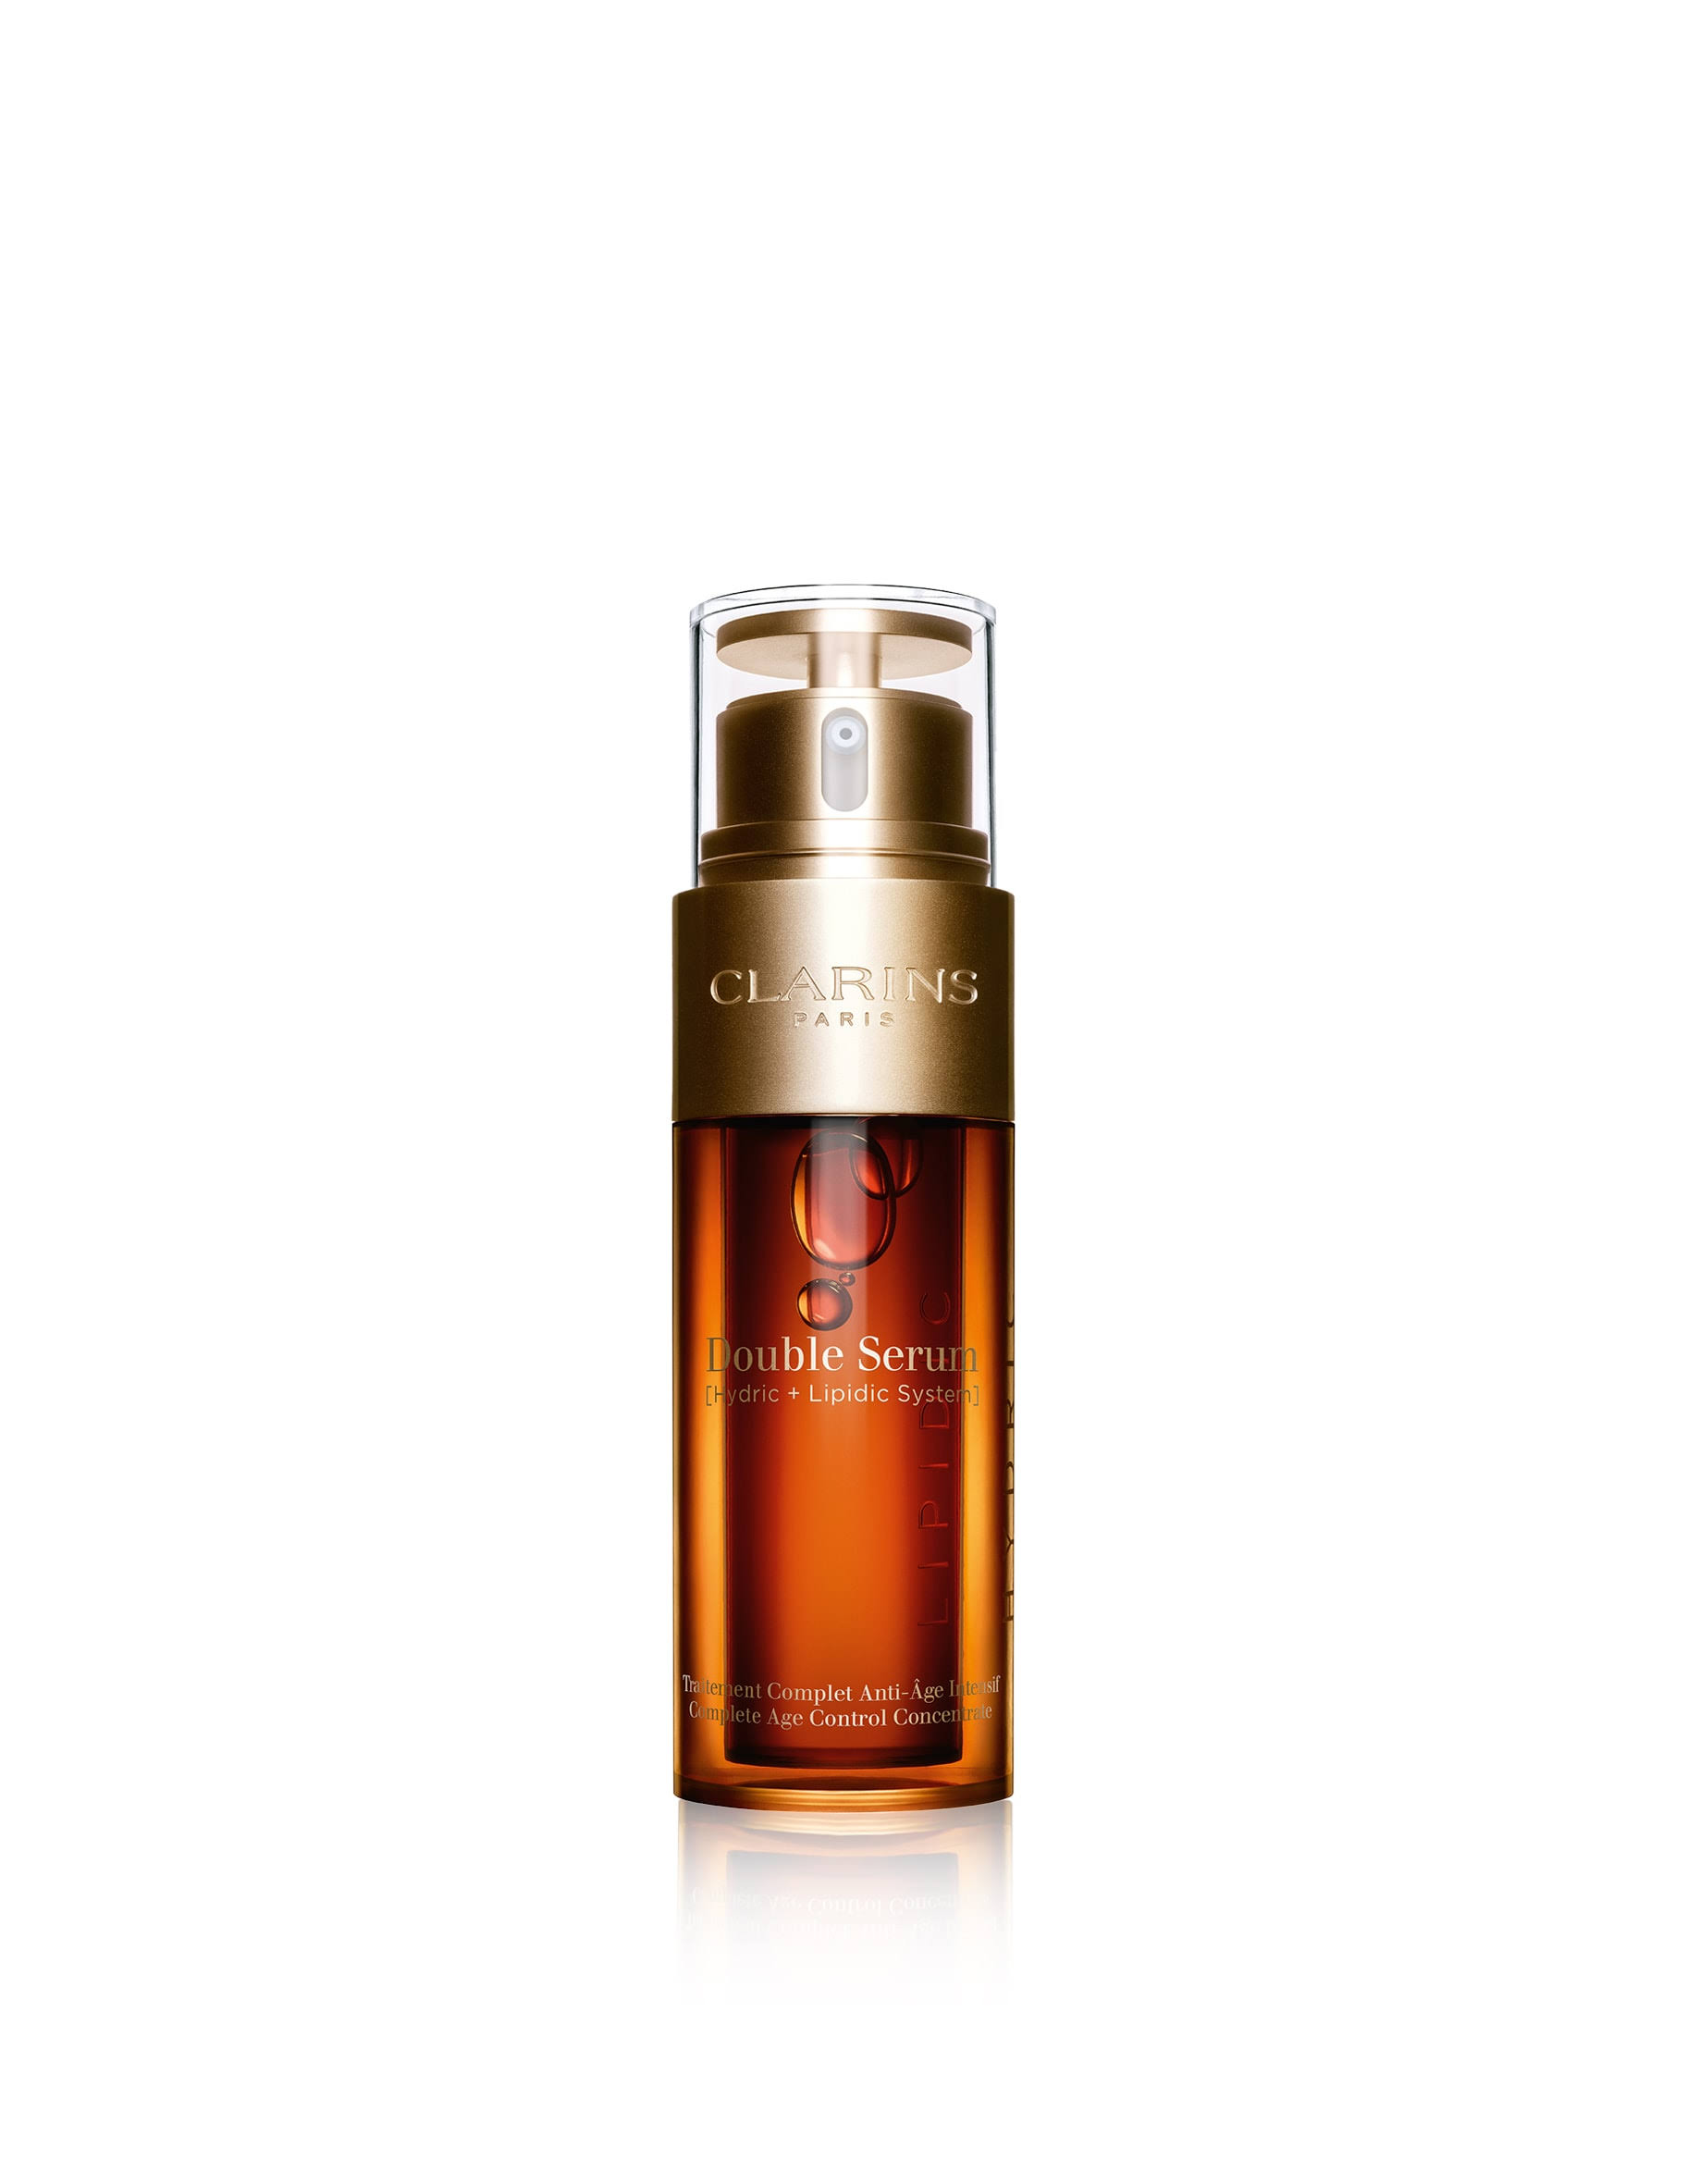 Clarins Double Serum Complete Age Control Concentrate, 50 ml